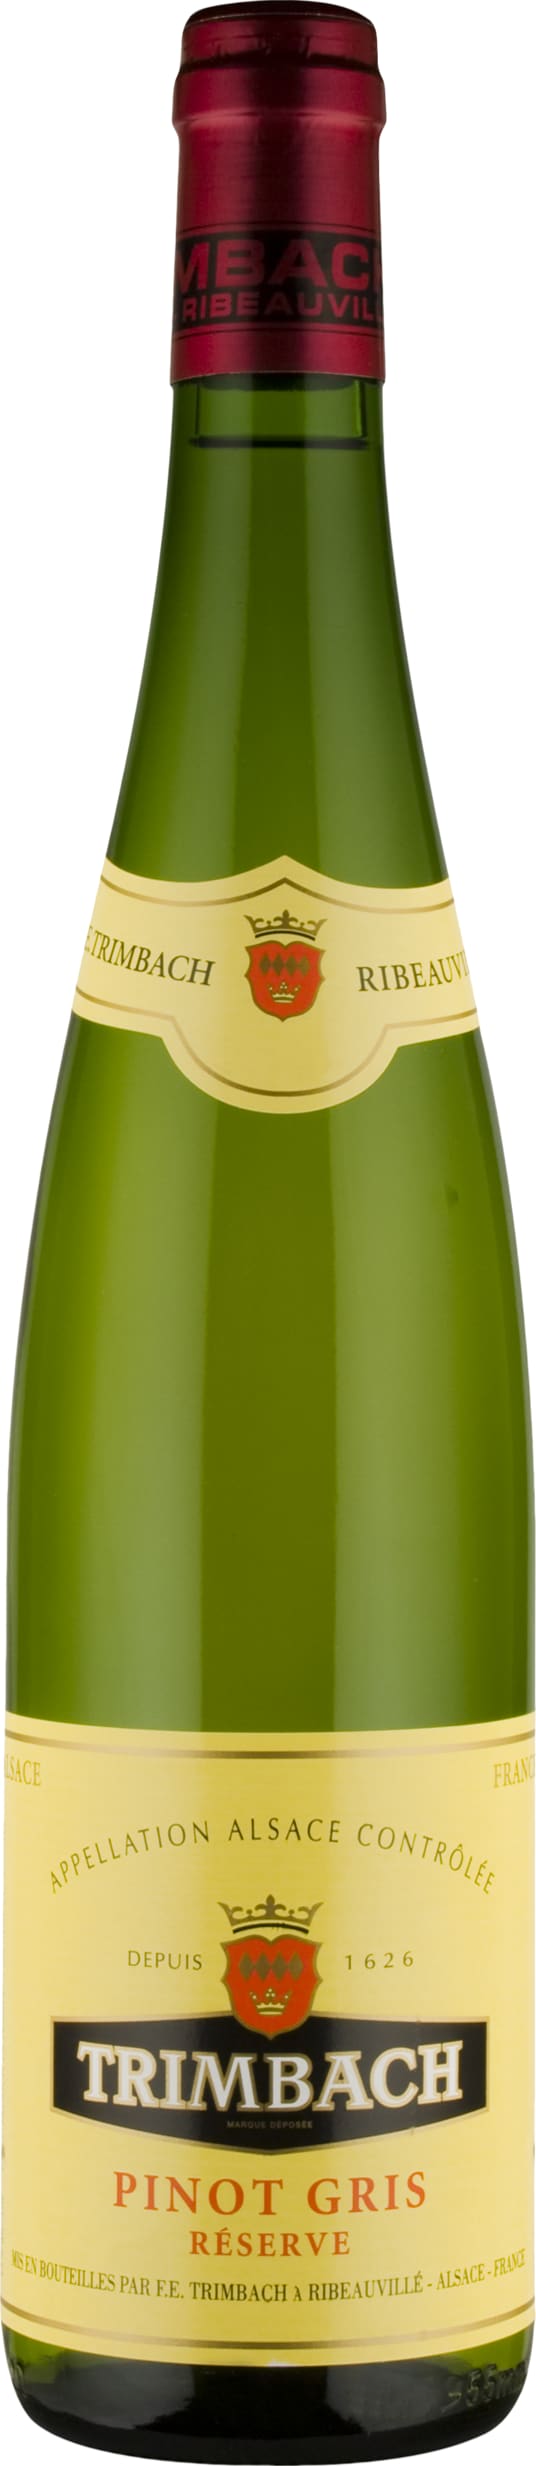 Trimbach Pinot Gris Reserve 2018 75cl - Buy Trimbach Wines from GREAT WINES DIRECT wine shop